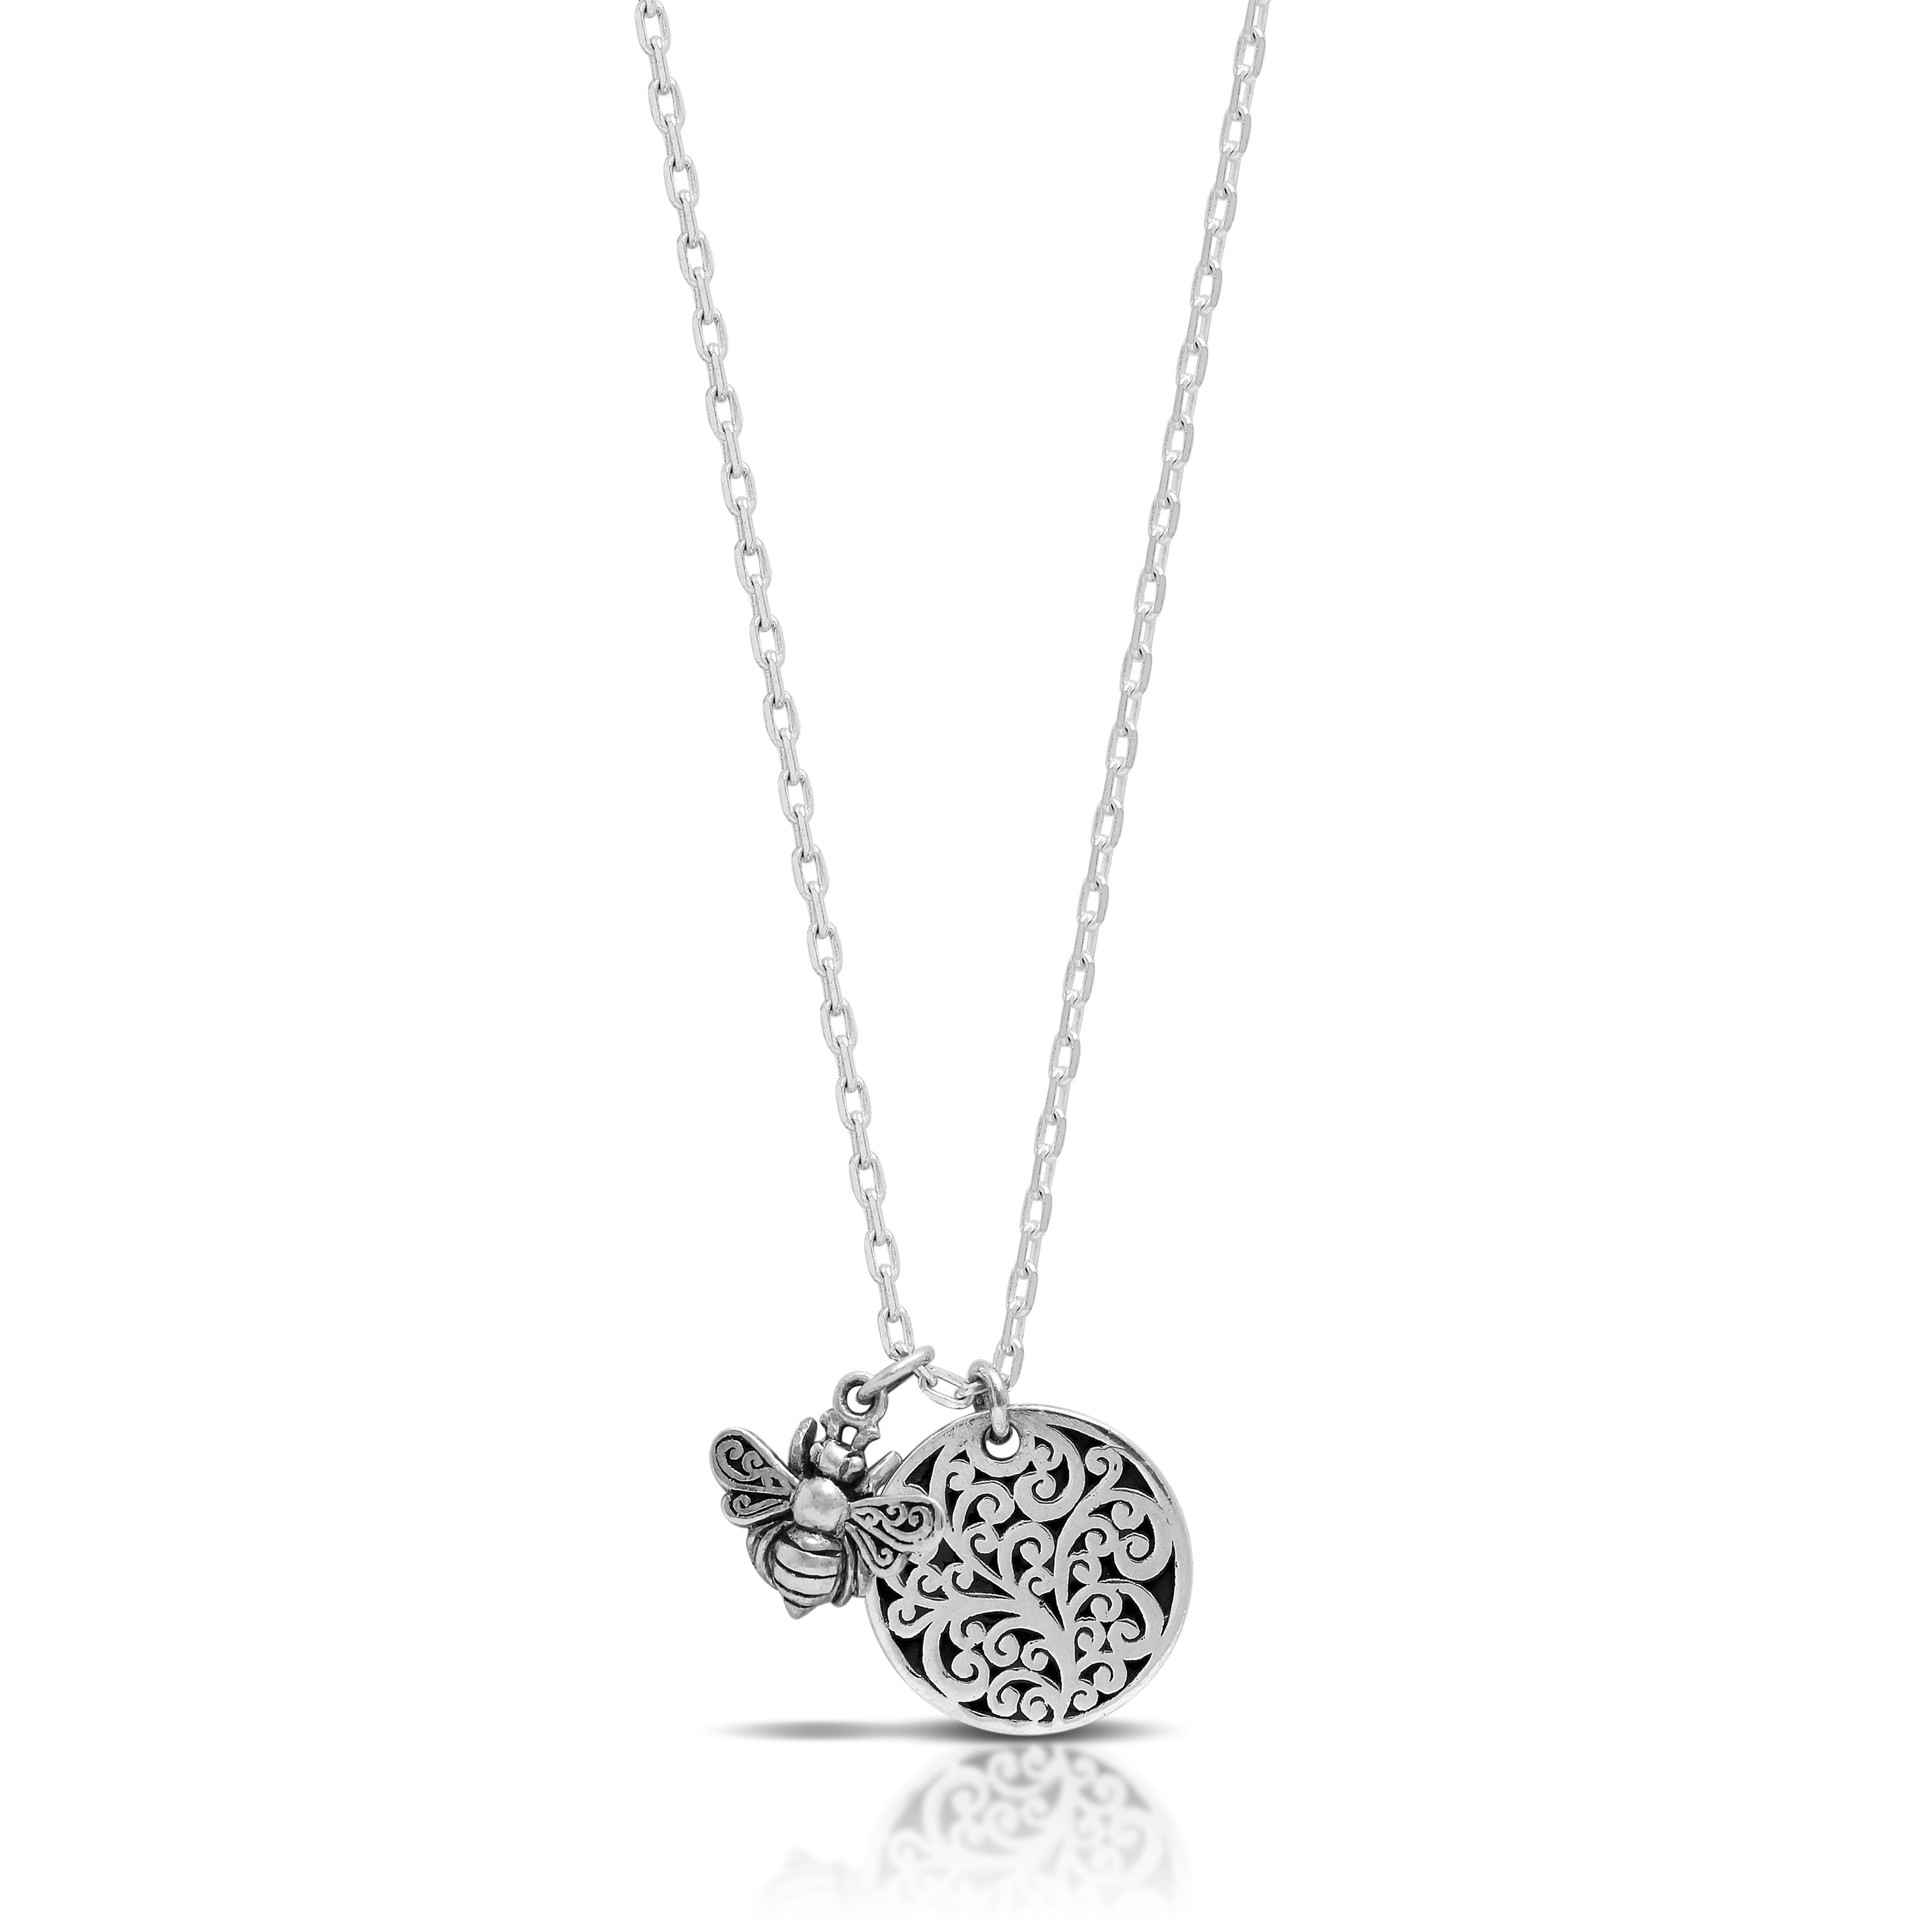 9757 Sterling Silver Necklace with Bee Charm and Engraved "Be The Change" Circle by Lois Hill